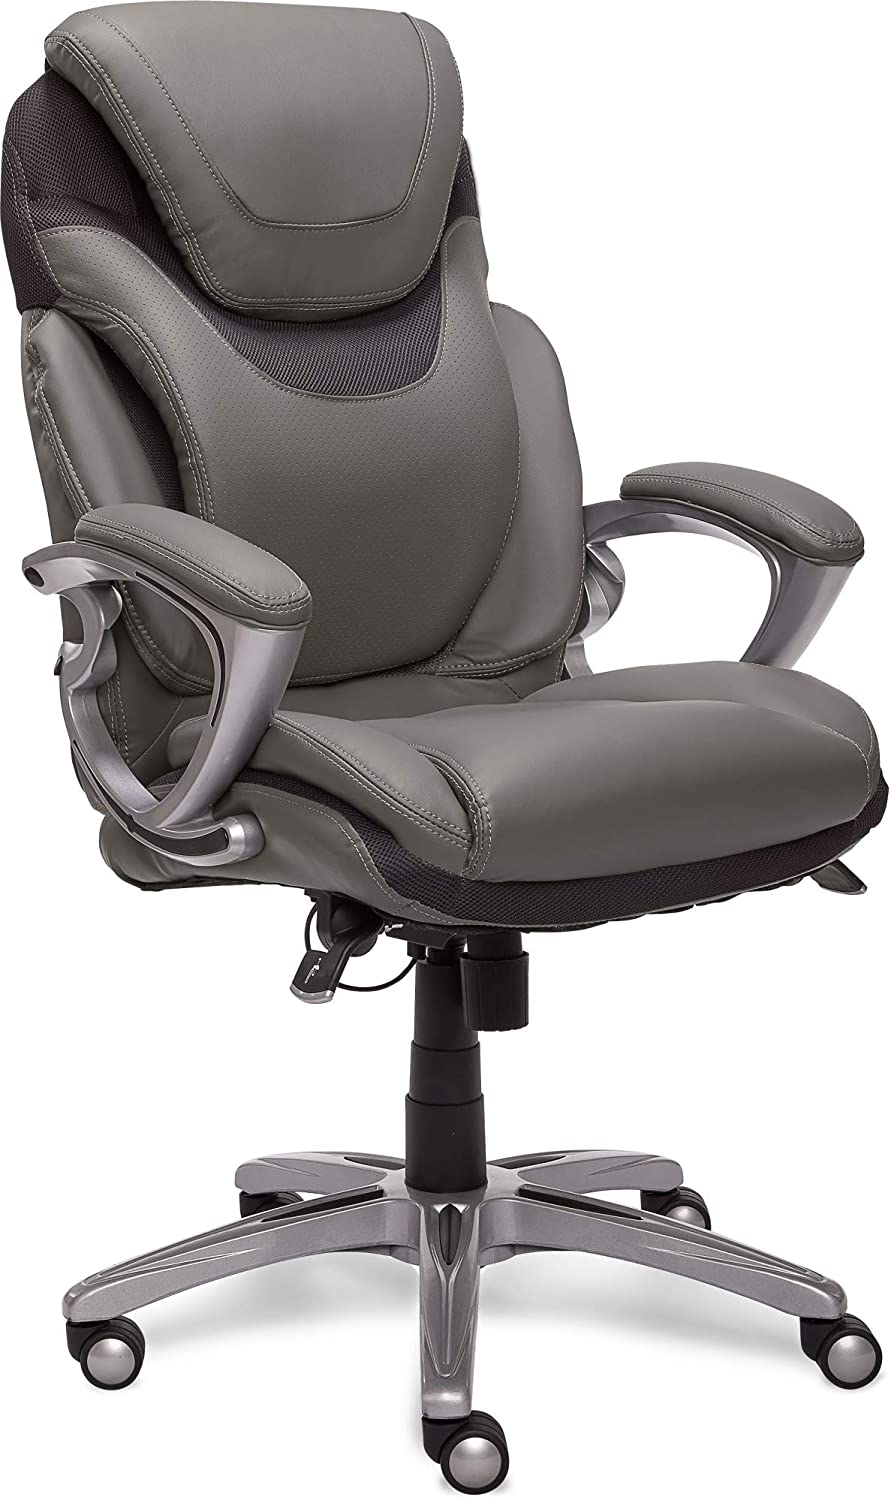 The 10 Best Office Chairs for Back Pain Relief in 2022 - SitWorkPlay